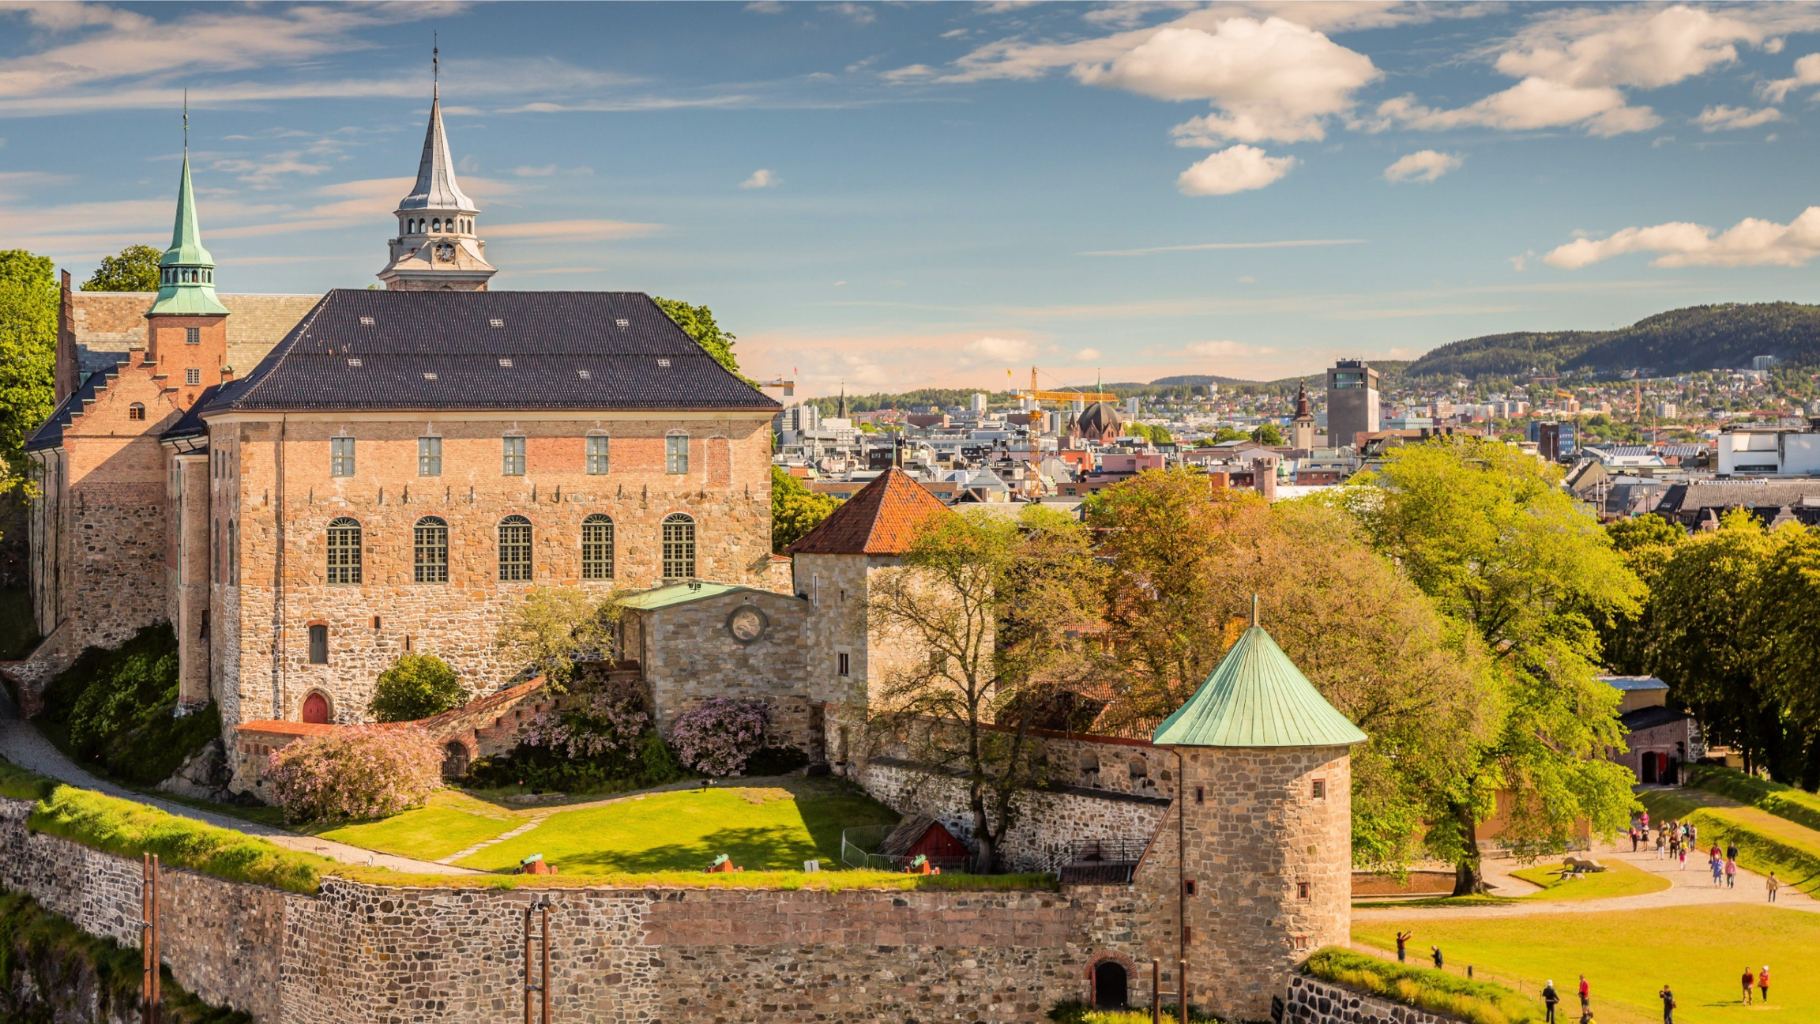 Akershus Fortress on the waterfront in Oslo, Norway.